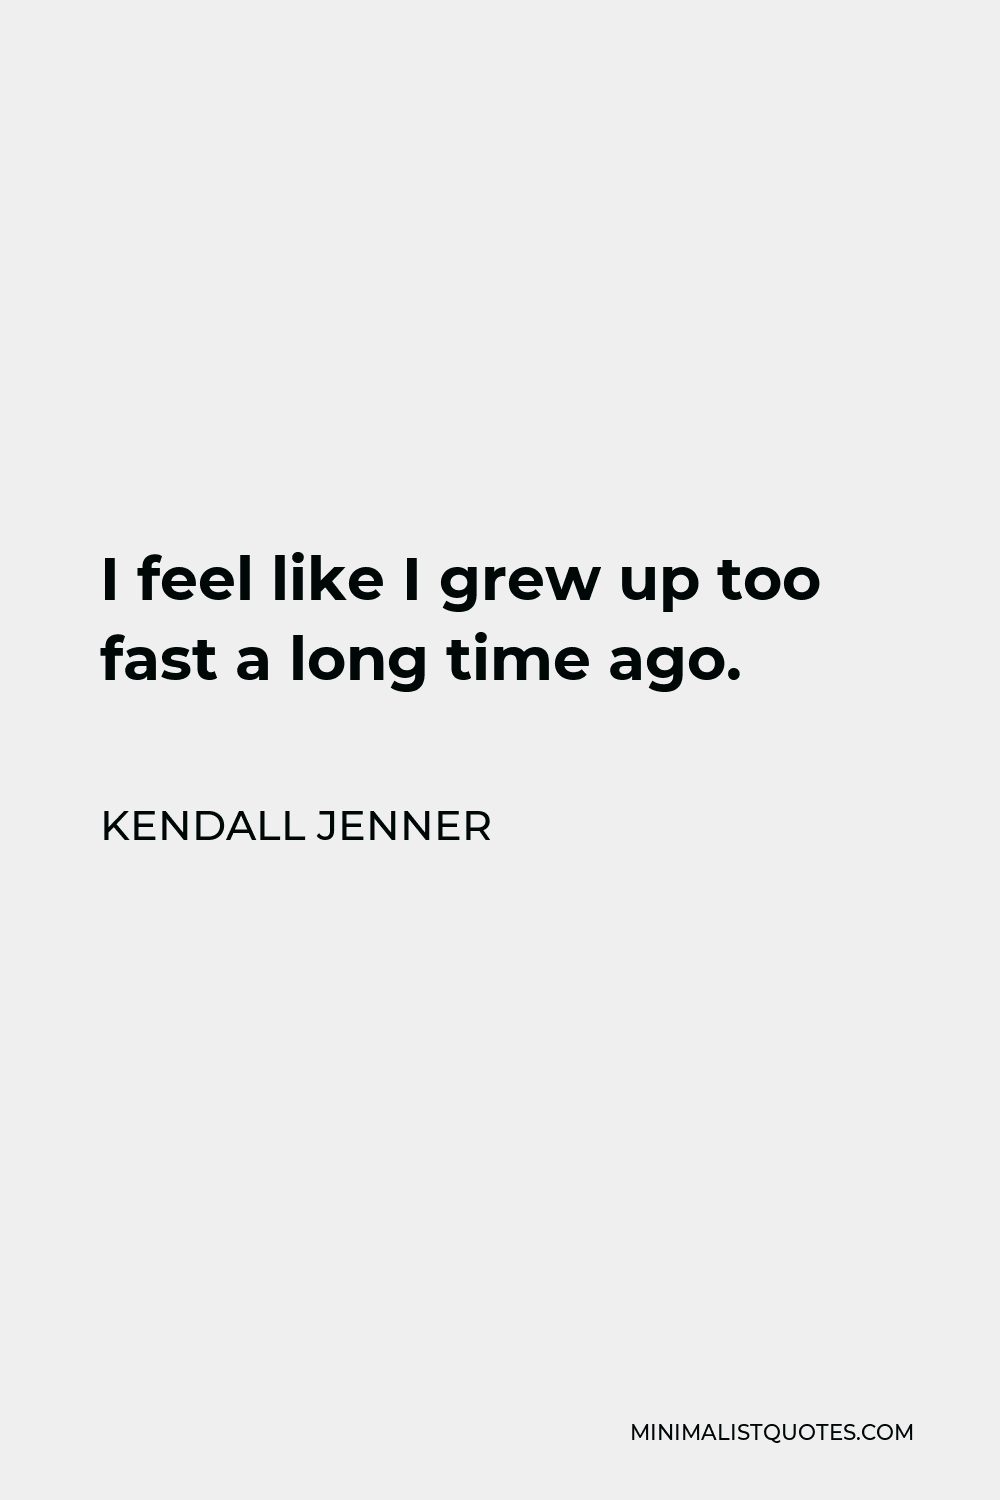 Kendall Jenner Quote - I feel like I grew up too fast a long time ago.